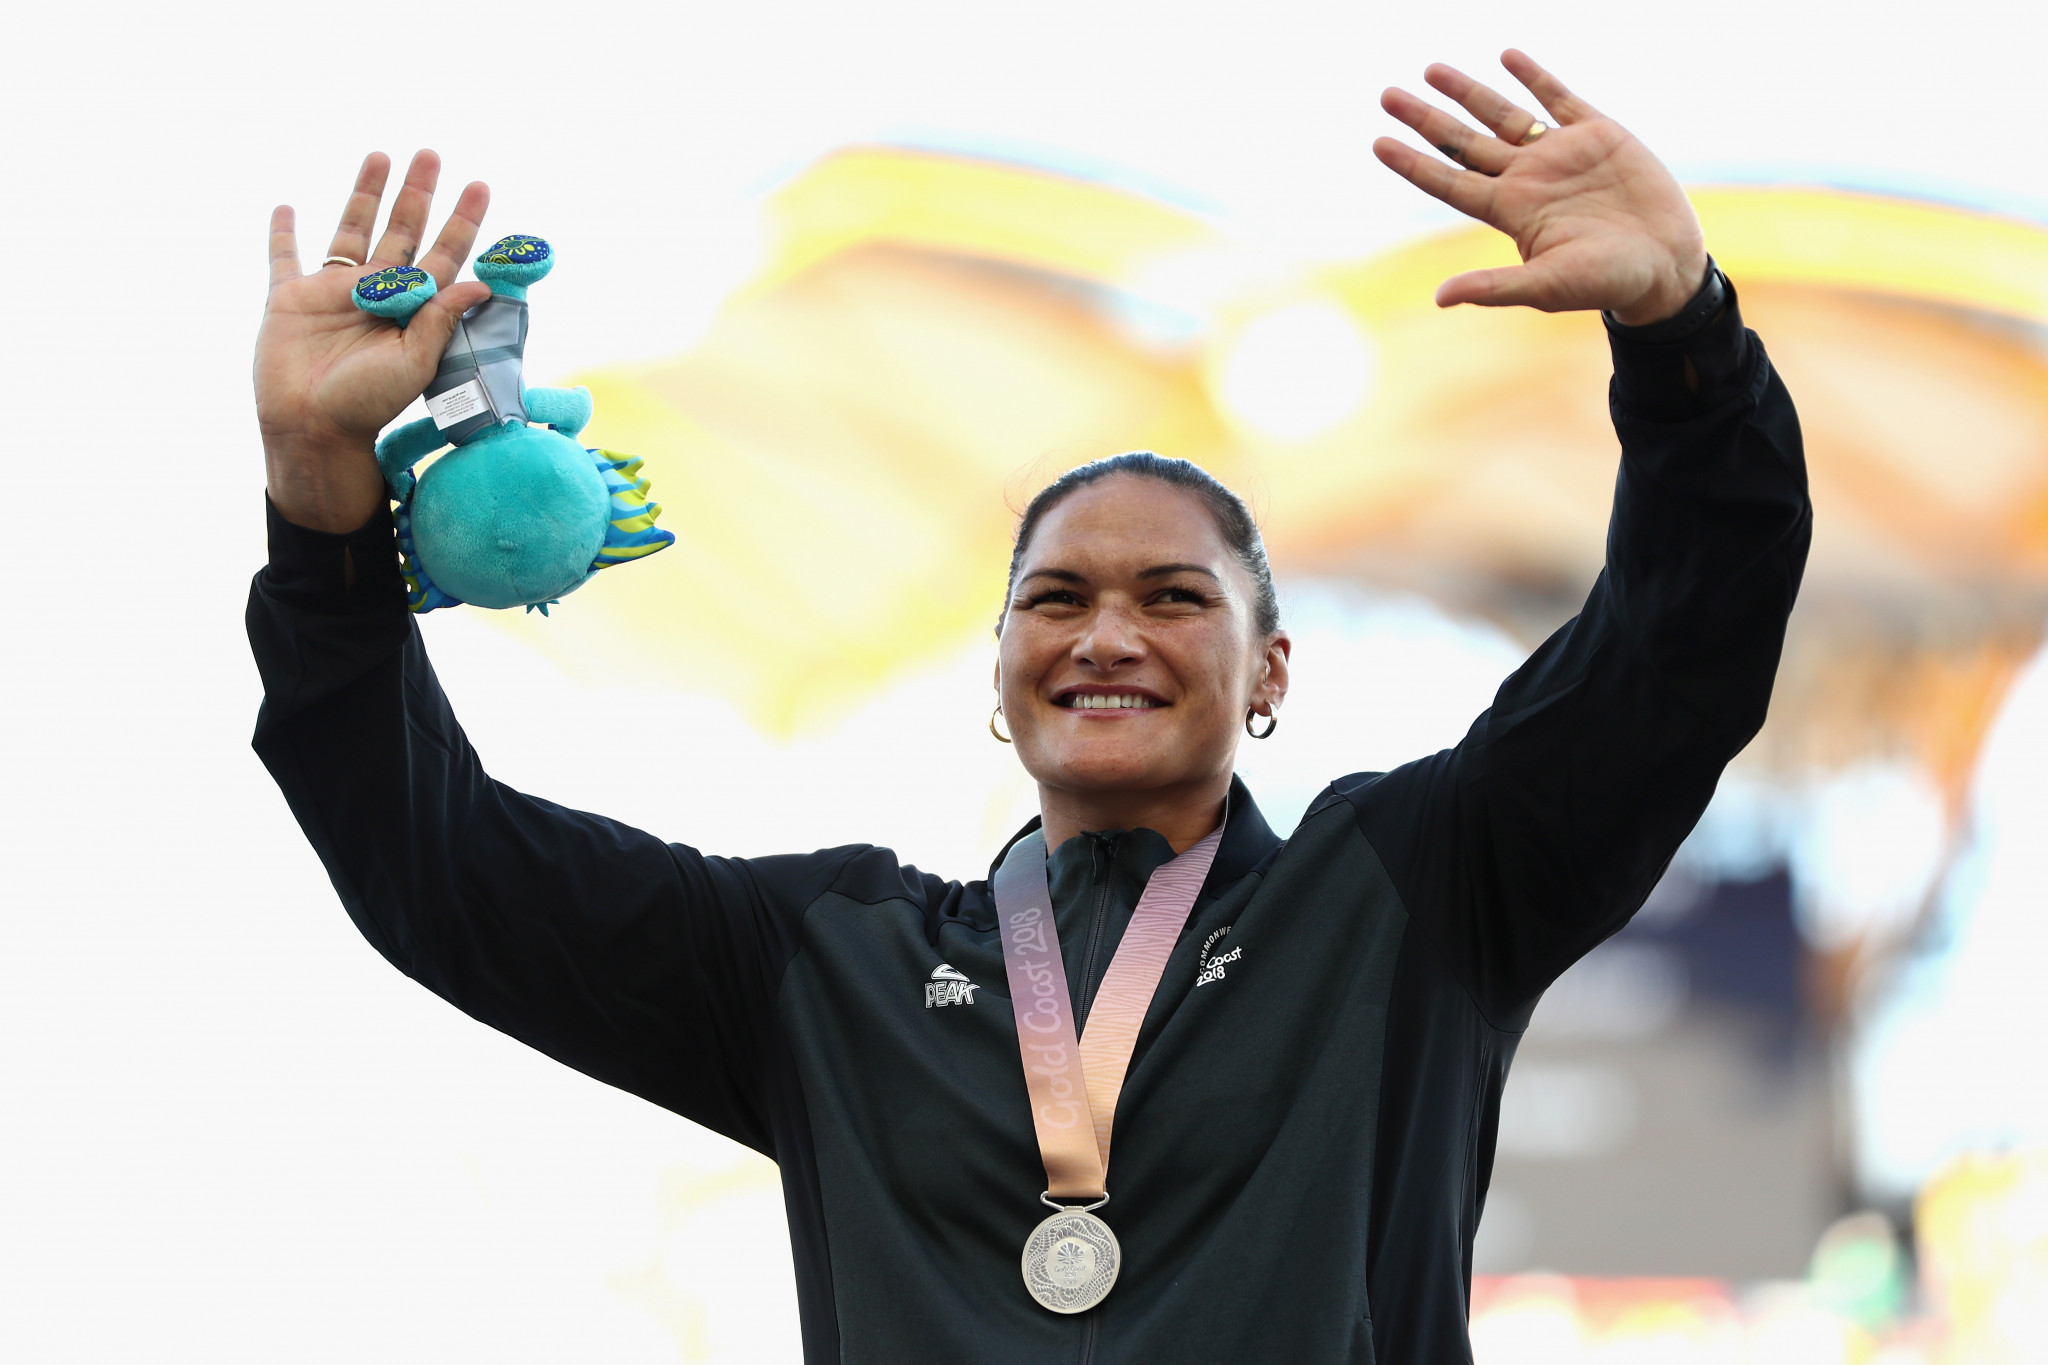 Valerie Adams only managed silver at the Gold Coast 2018 Commonwealth Games ©Getty Images